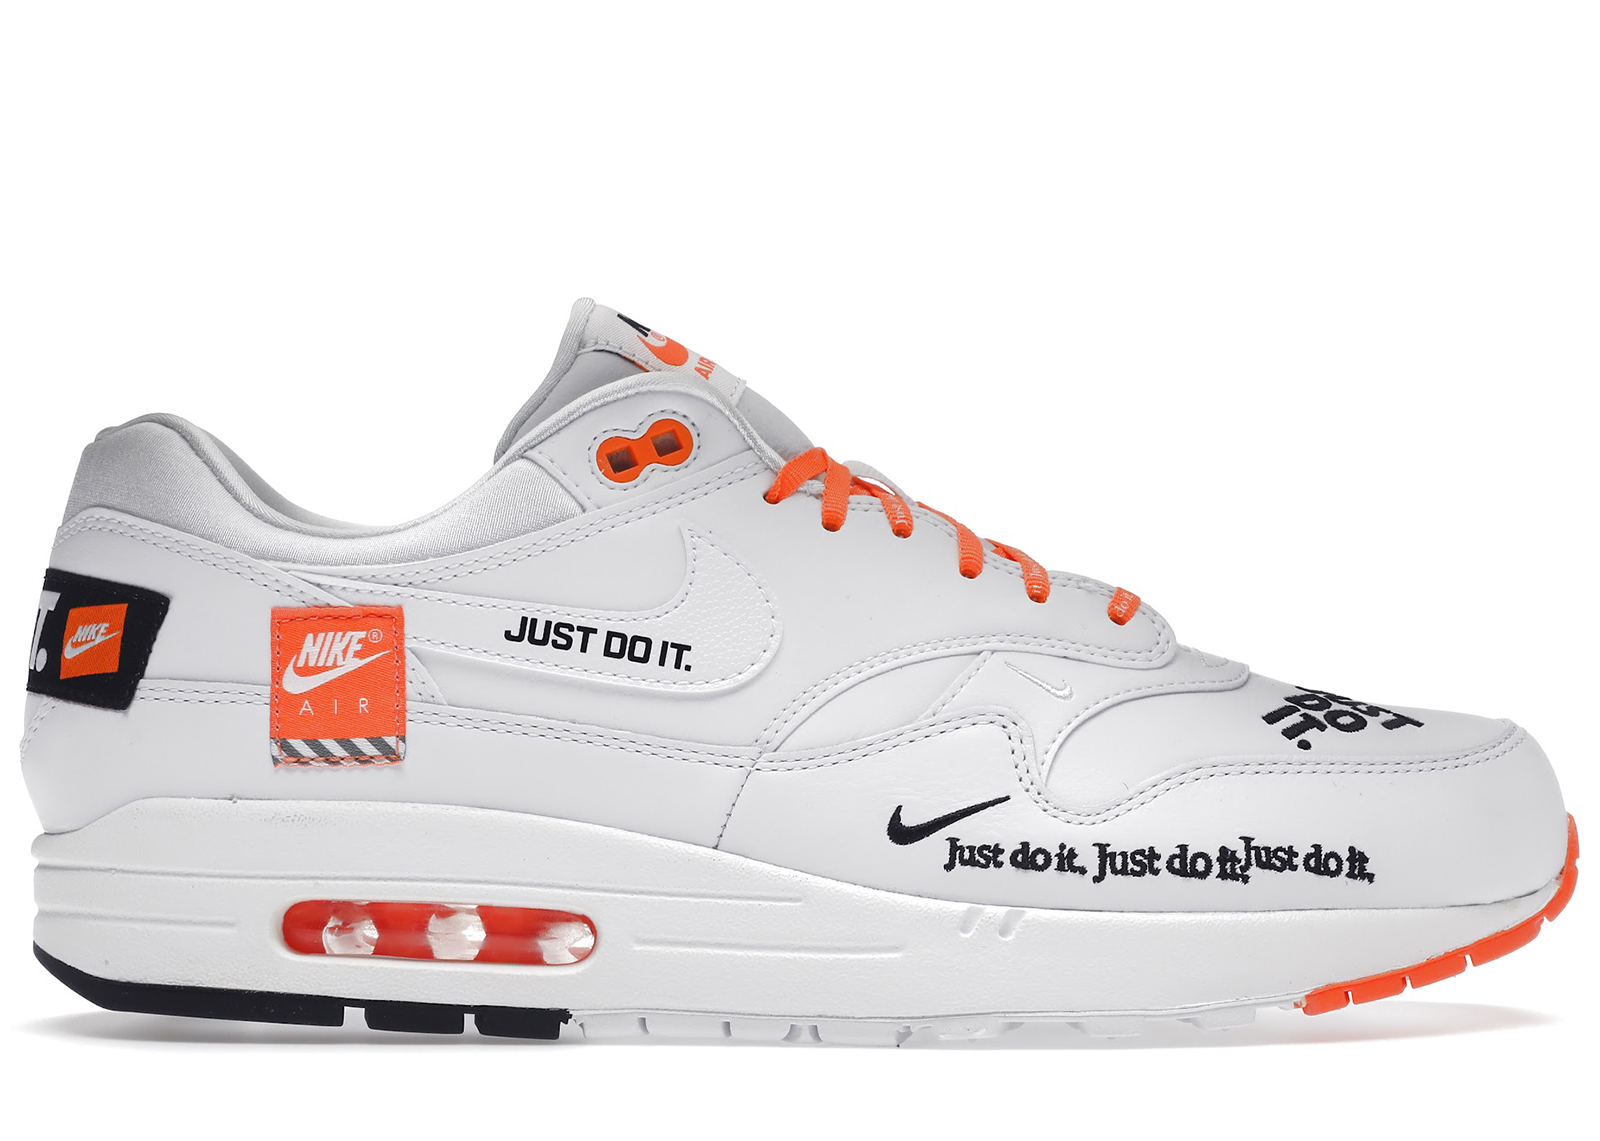 Nike Air Max 1 Just Do It Pack White Men's - AO1021-100 - US